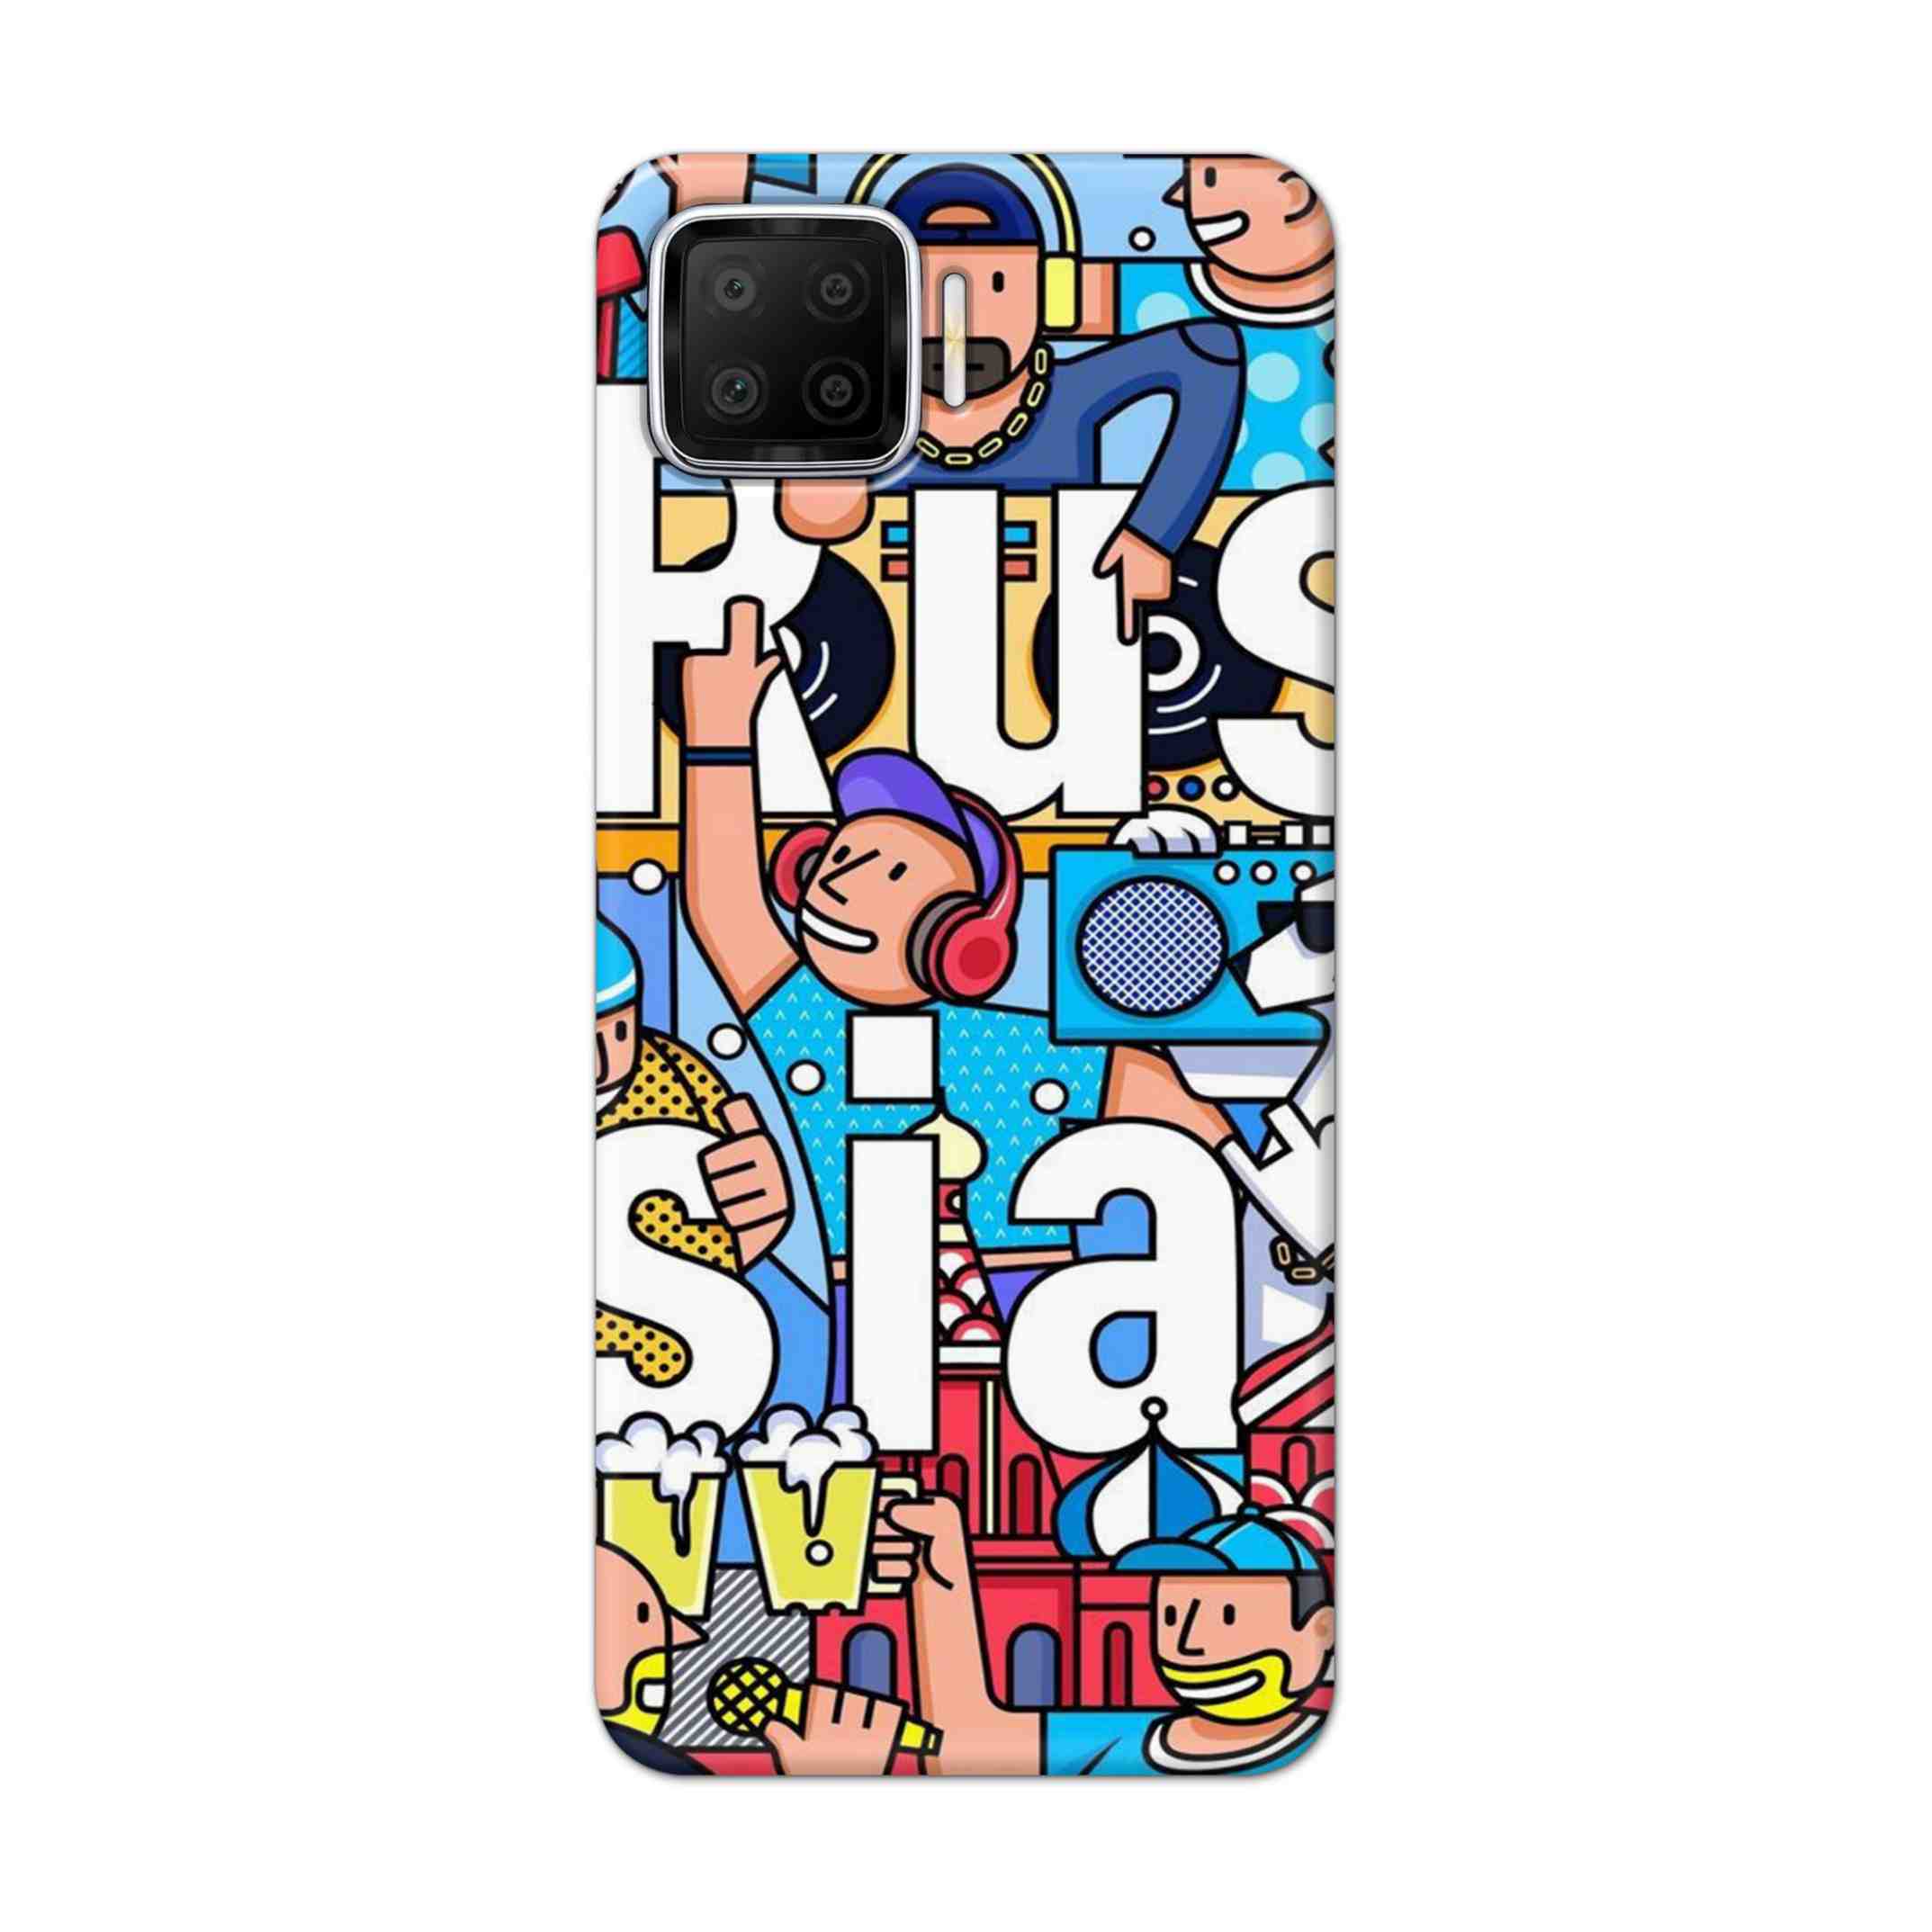 Buy Russia Hard Back Mobile Phone Case Cover For Oppo F17 Online